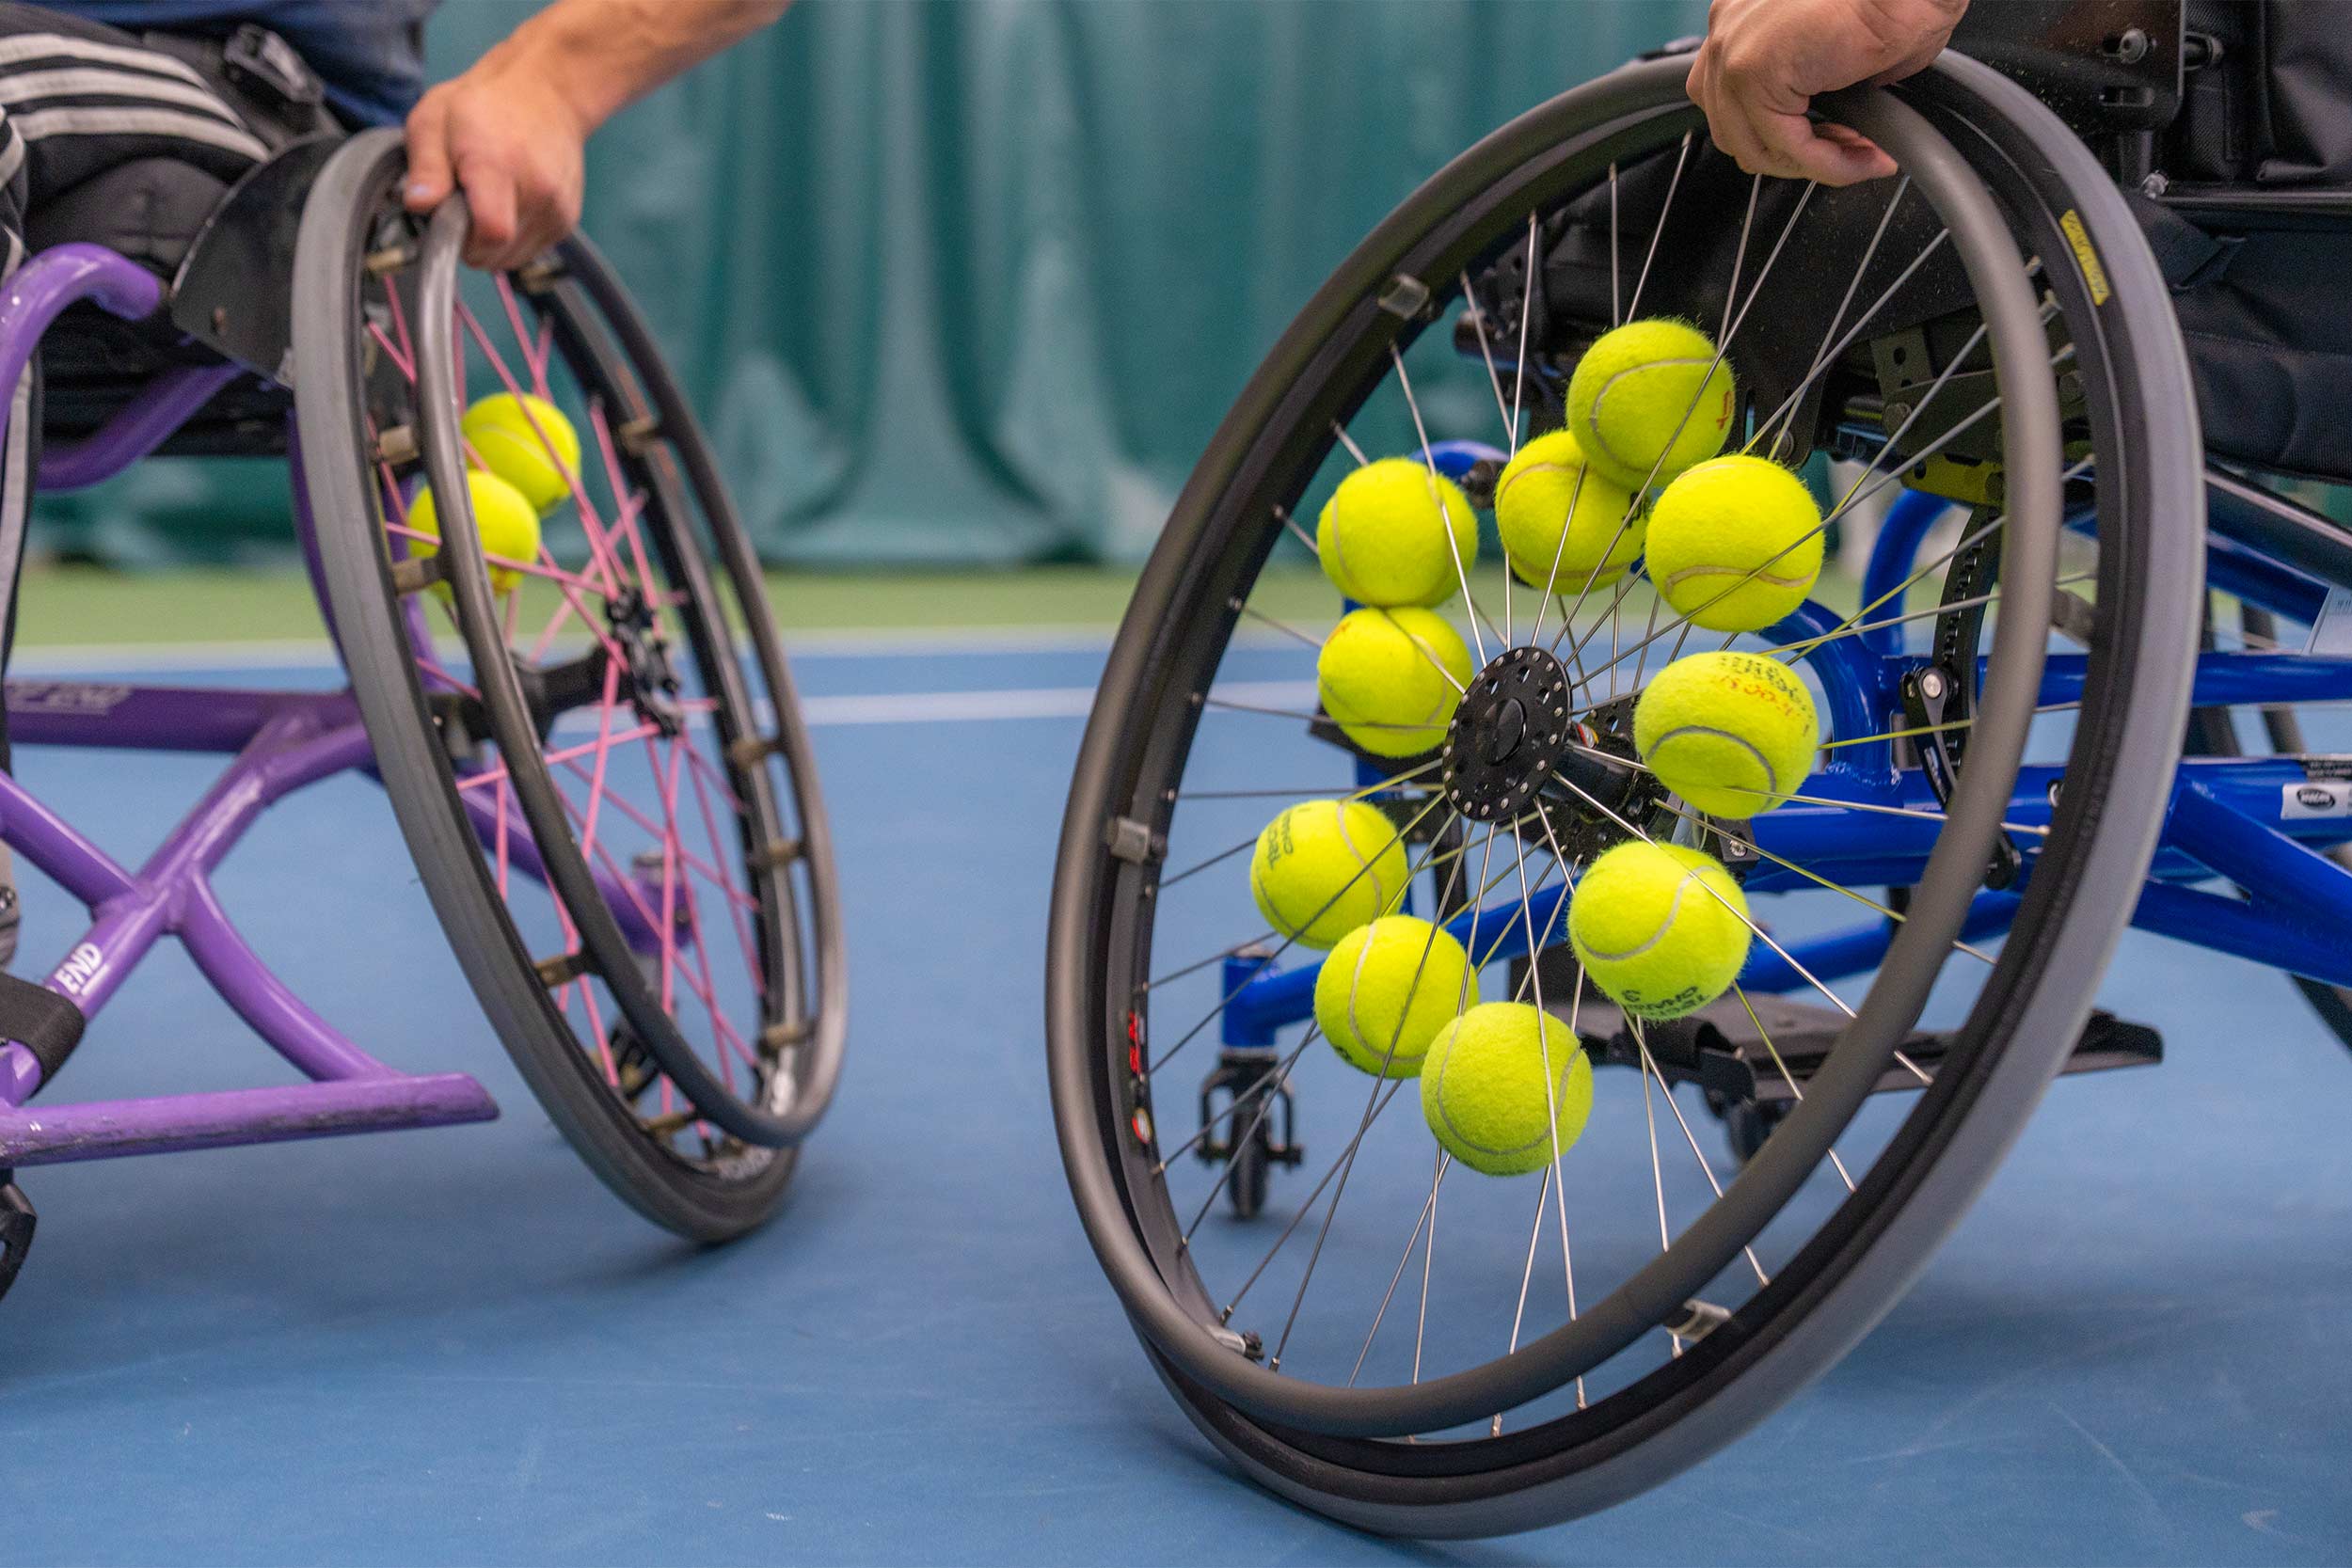 Two wheelchairs, with tennis balls in their spokes, rest on a blue tennis court. 